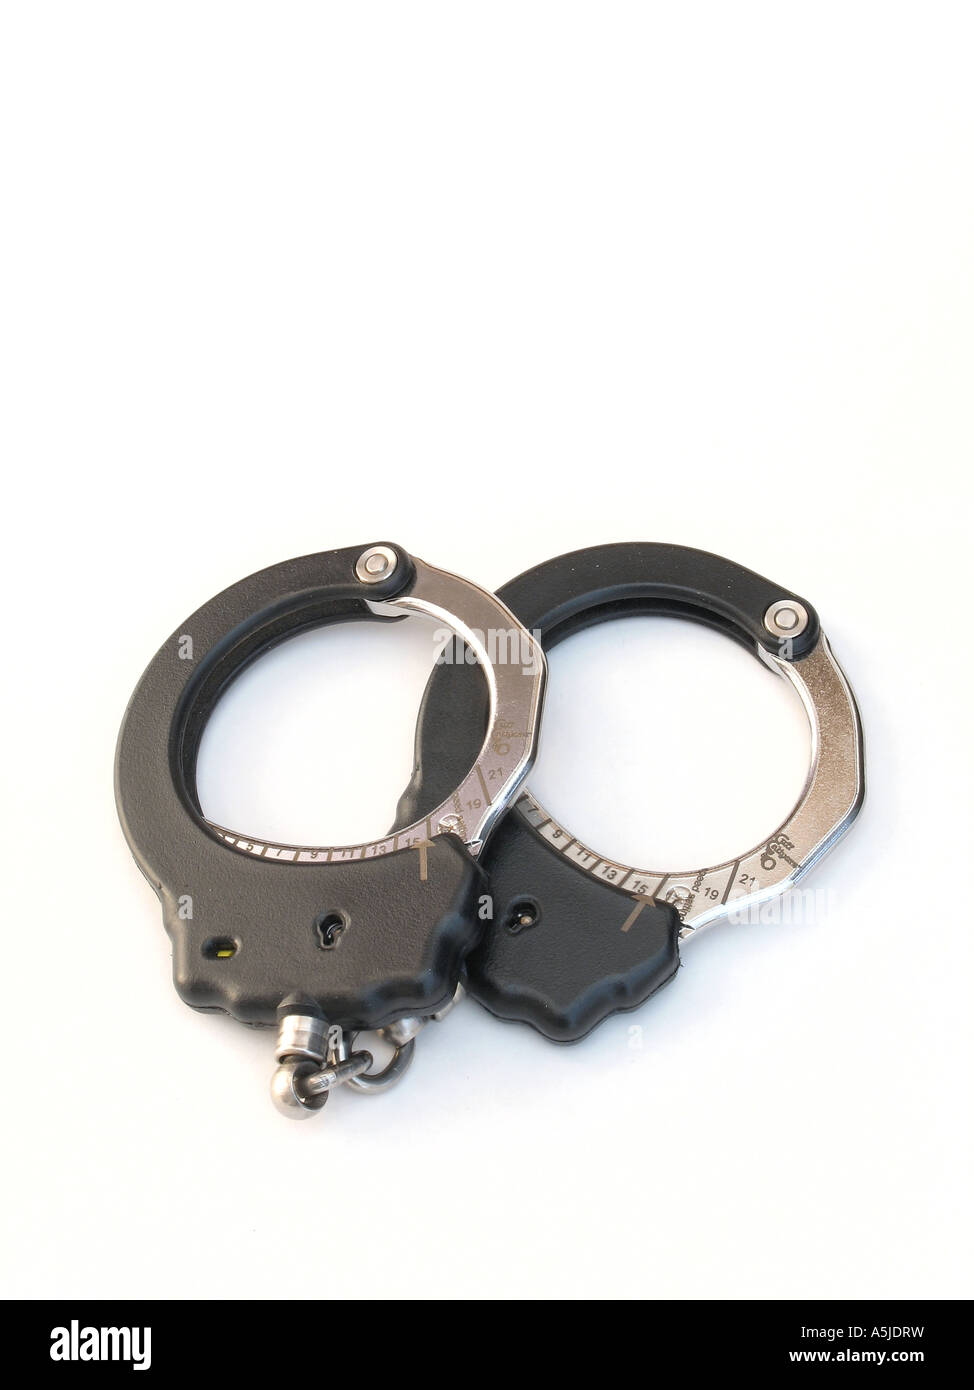 A pair of black ASP tactical police handcuffs Stock Photo